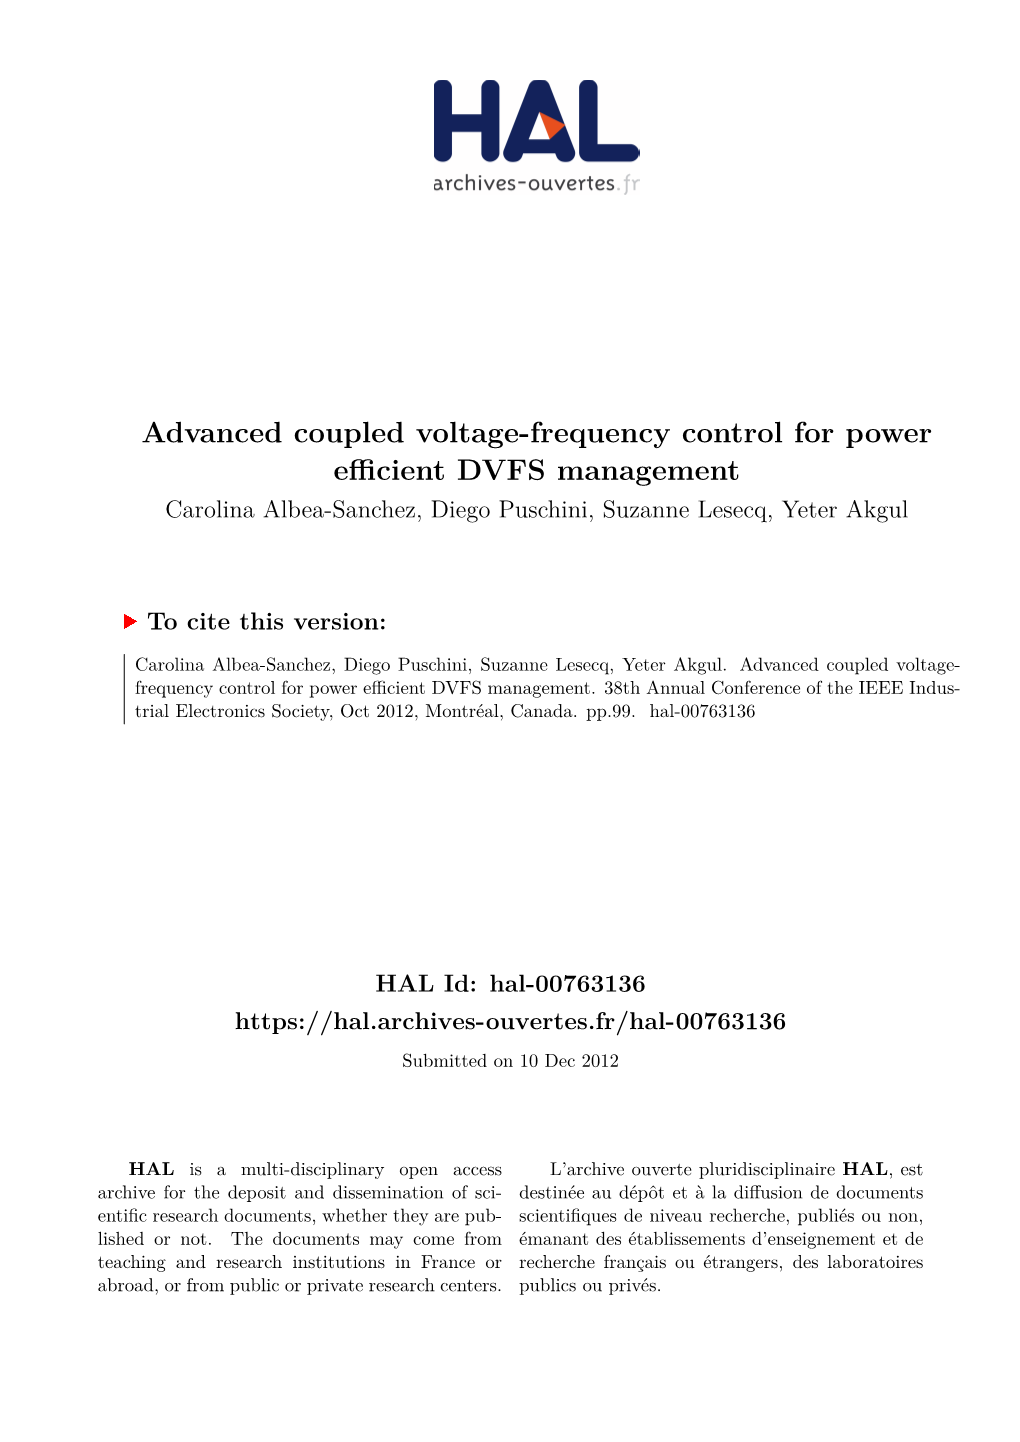 Advanced Coupled Voltage-Frequency Control for Power Efficient DVFS